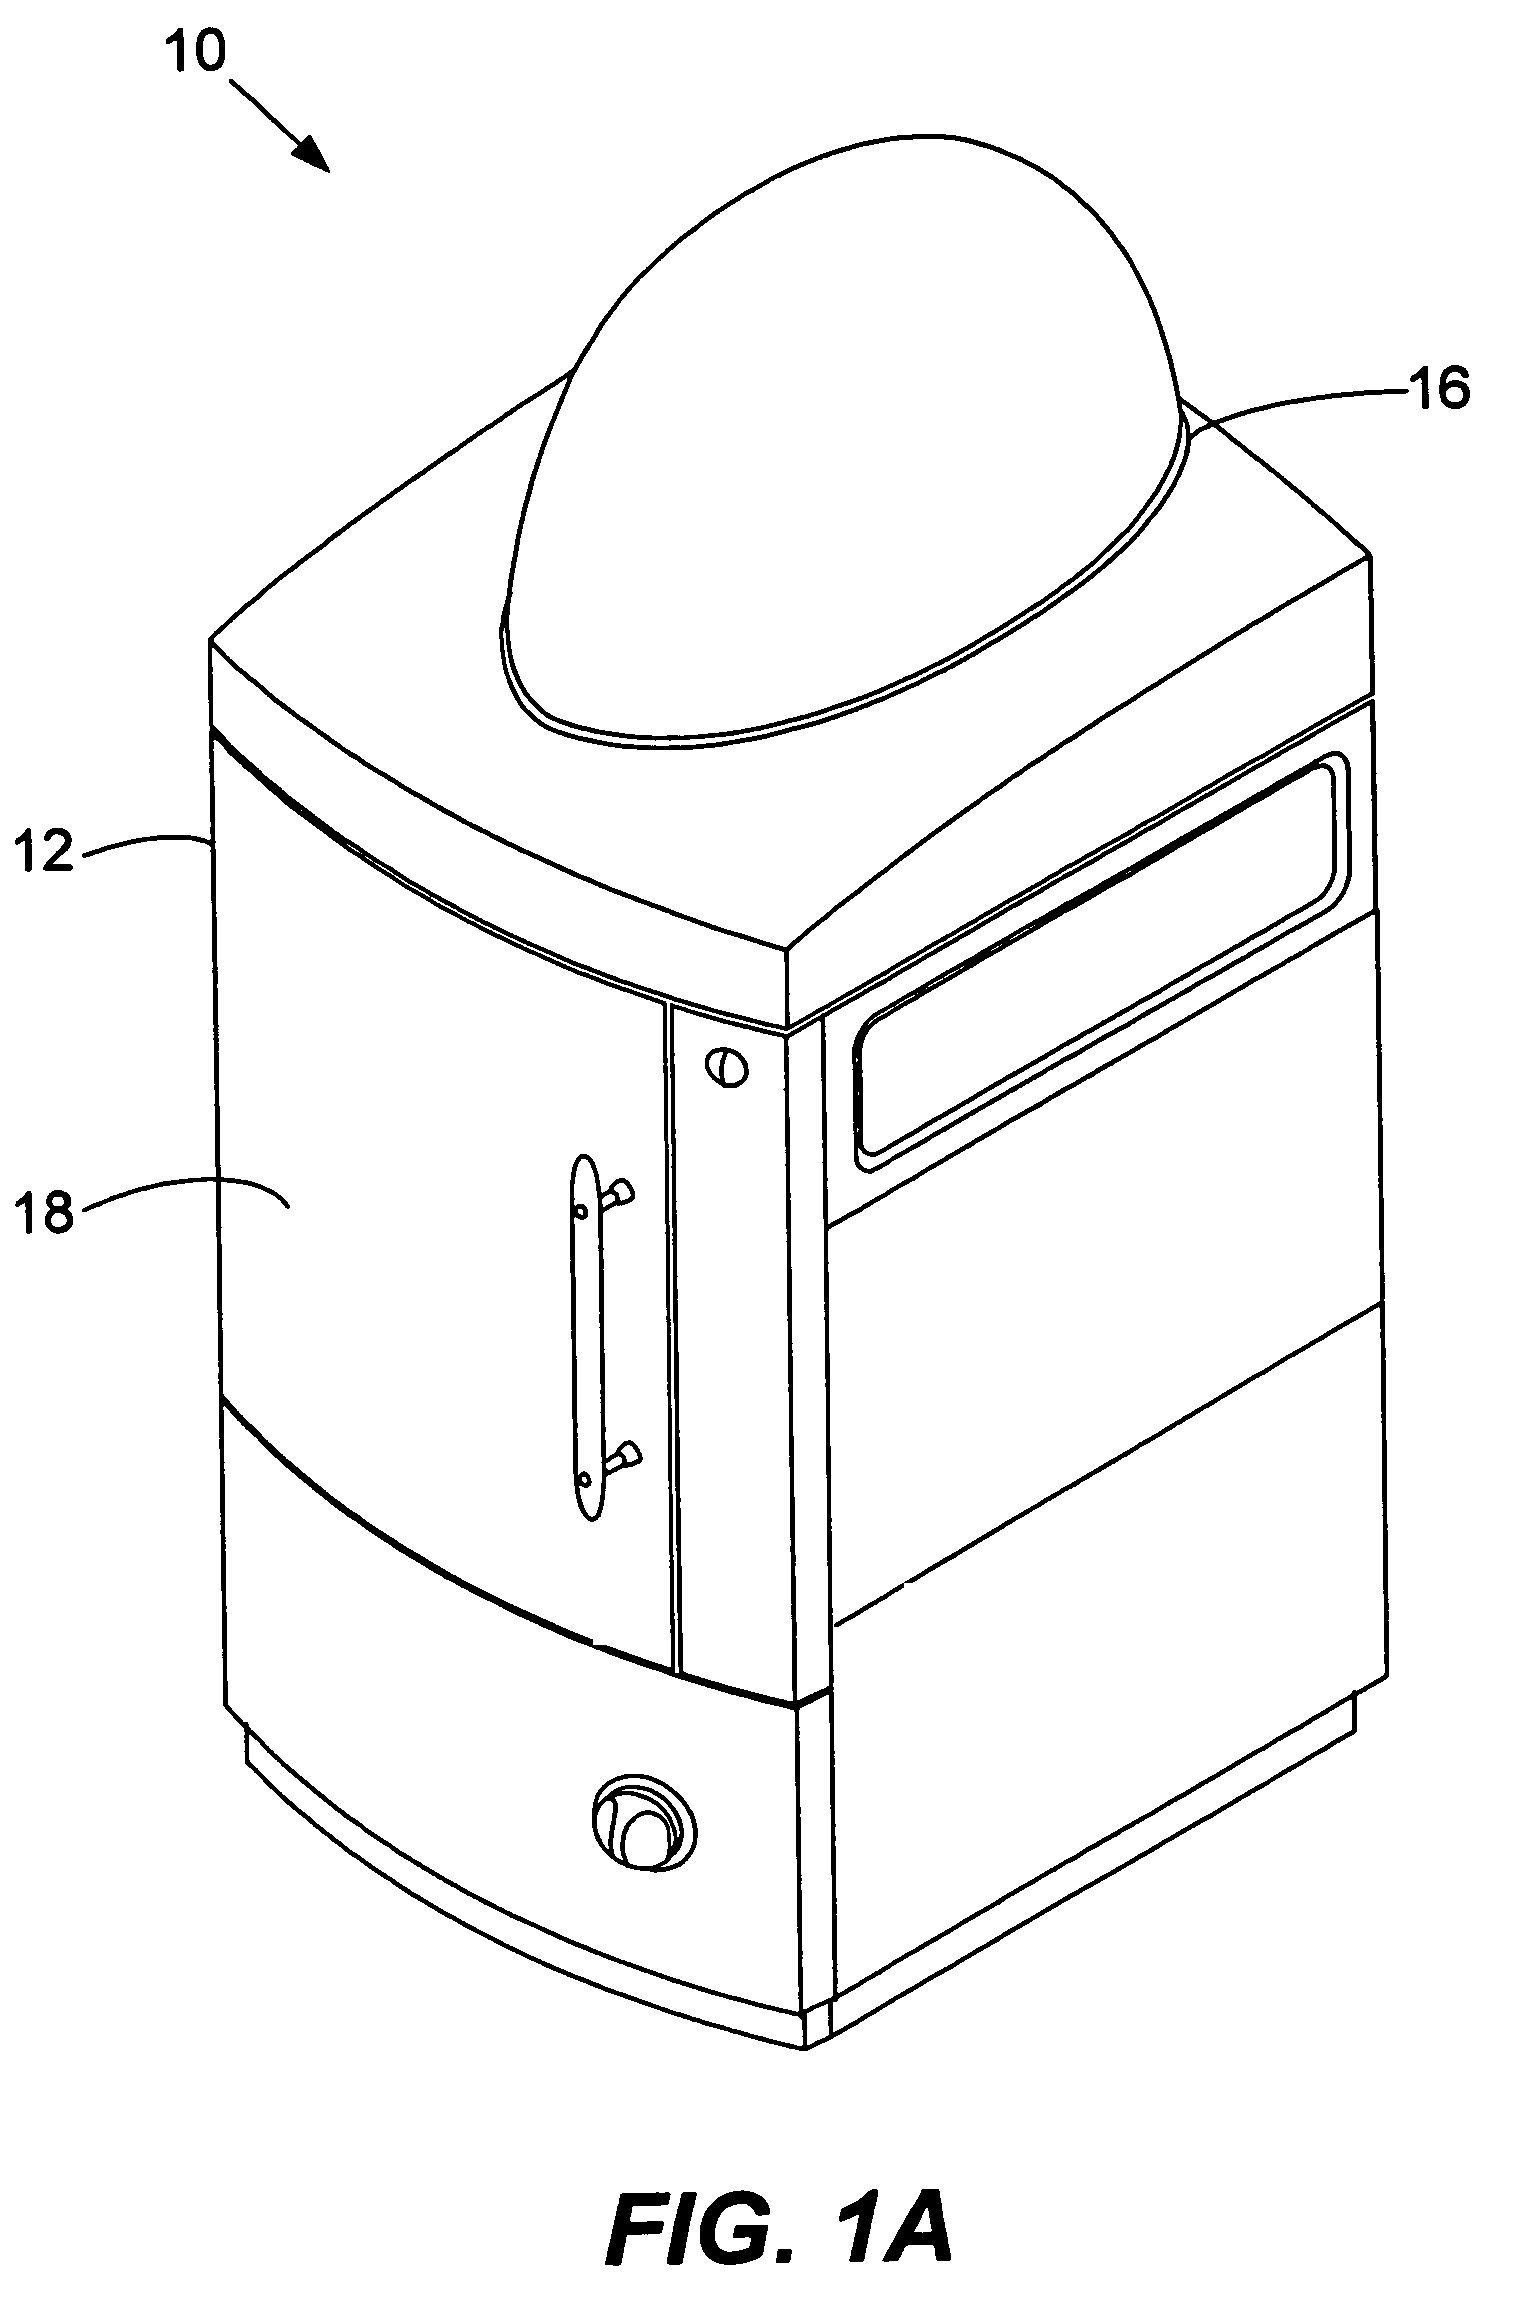 Tissue phantom calibration device for low level light imaging systems